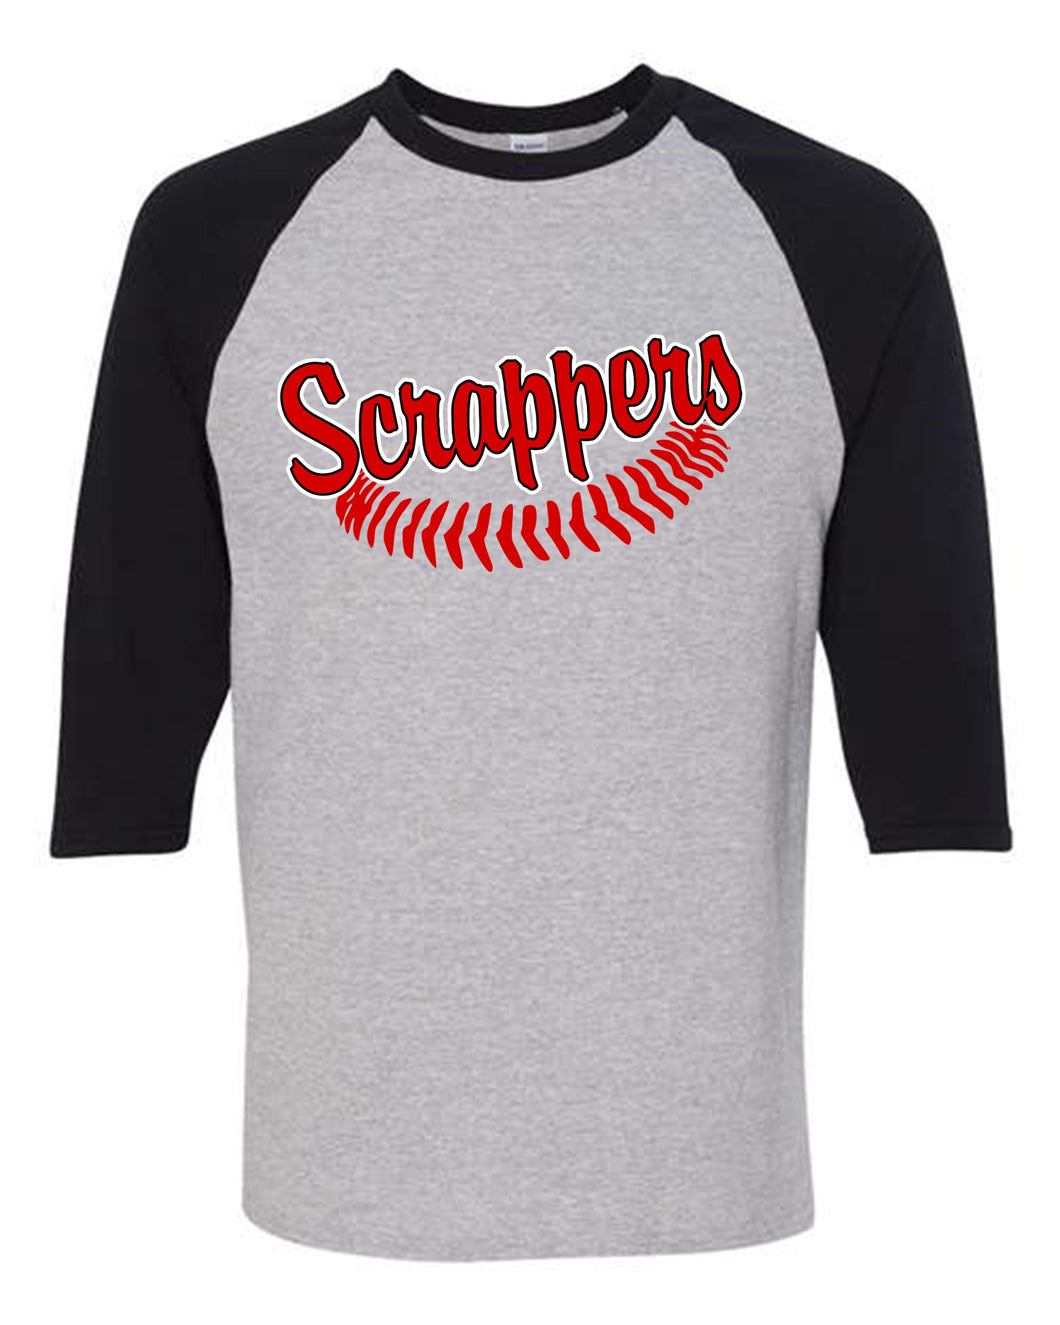 Scrappers Baseball Raglan (Adult Sizes Only)